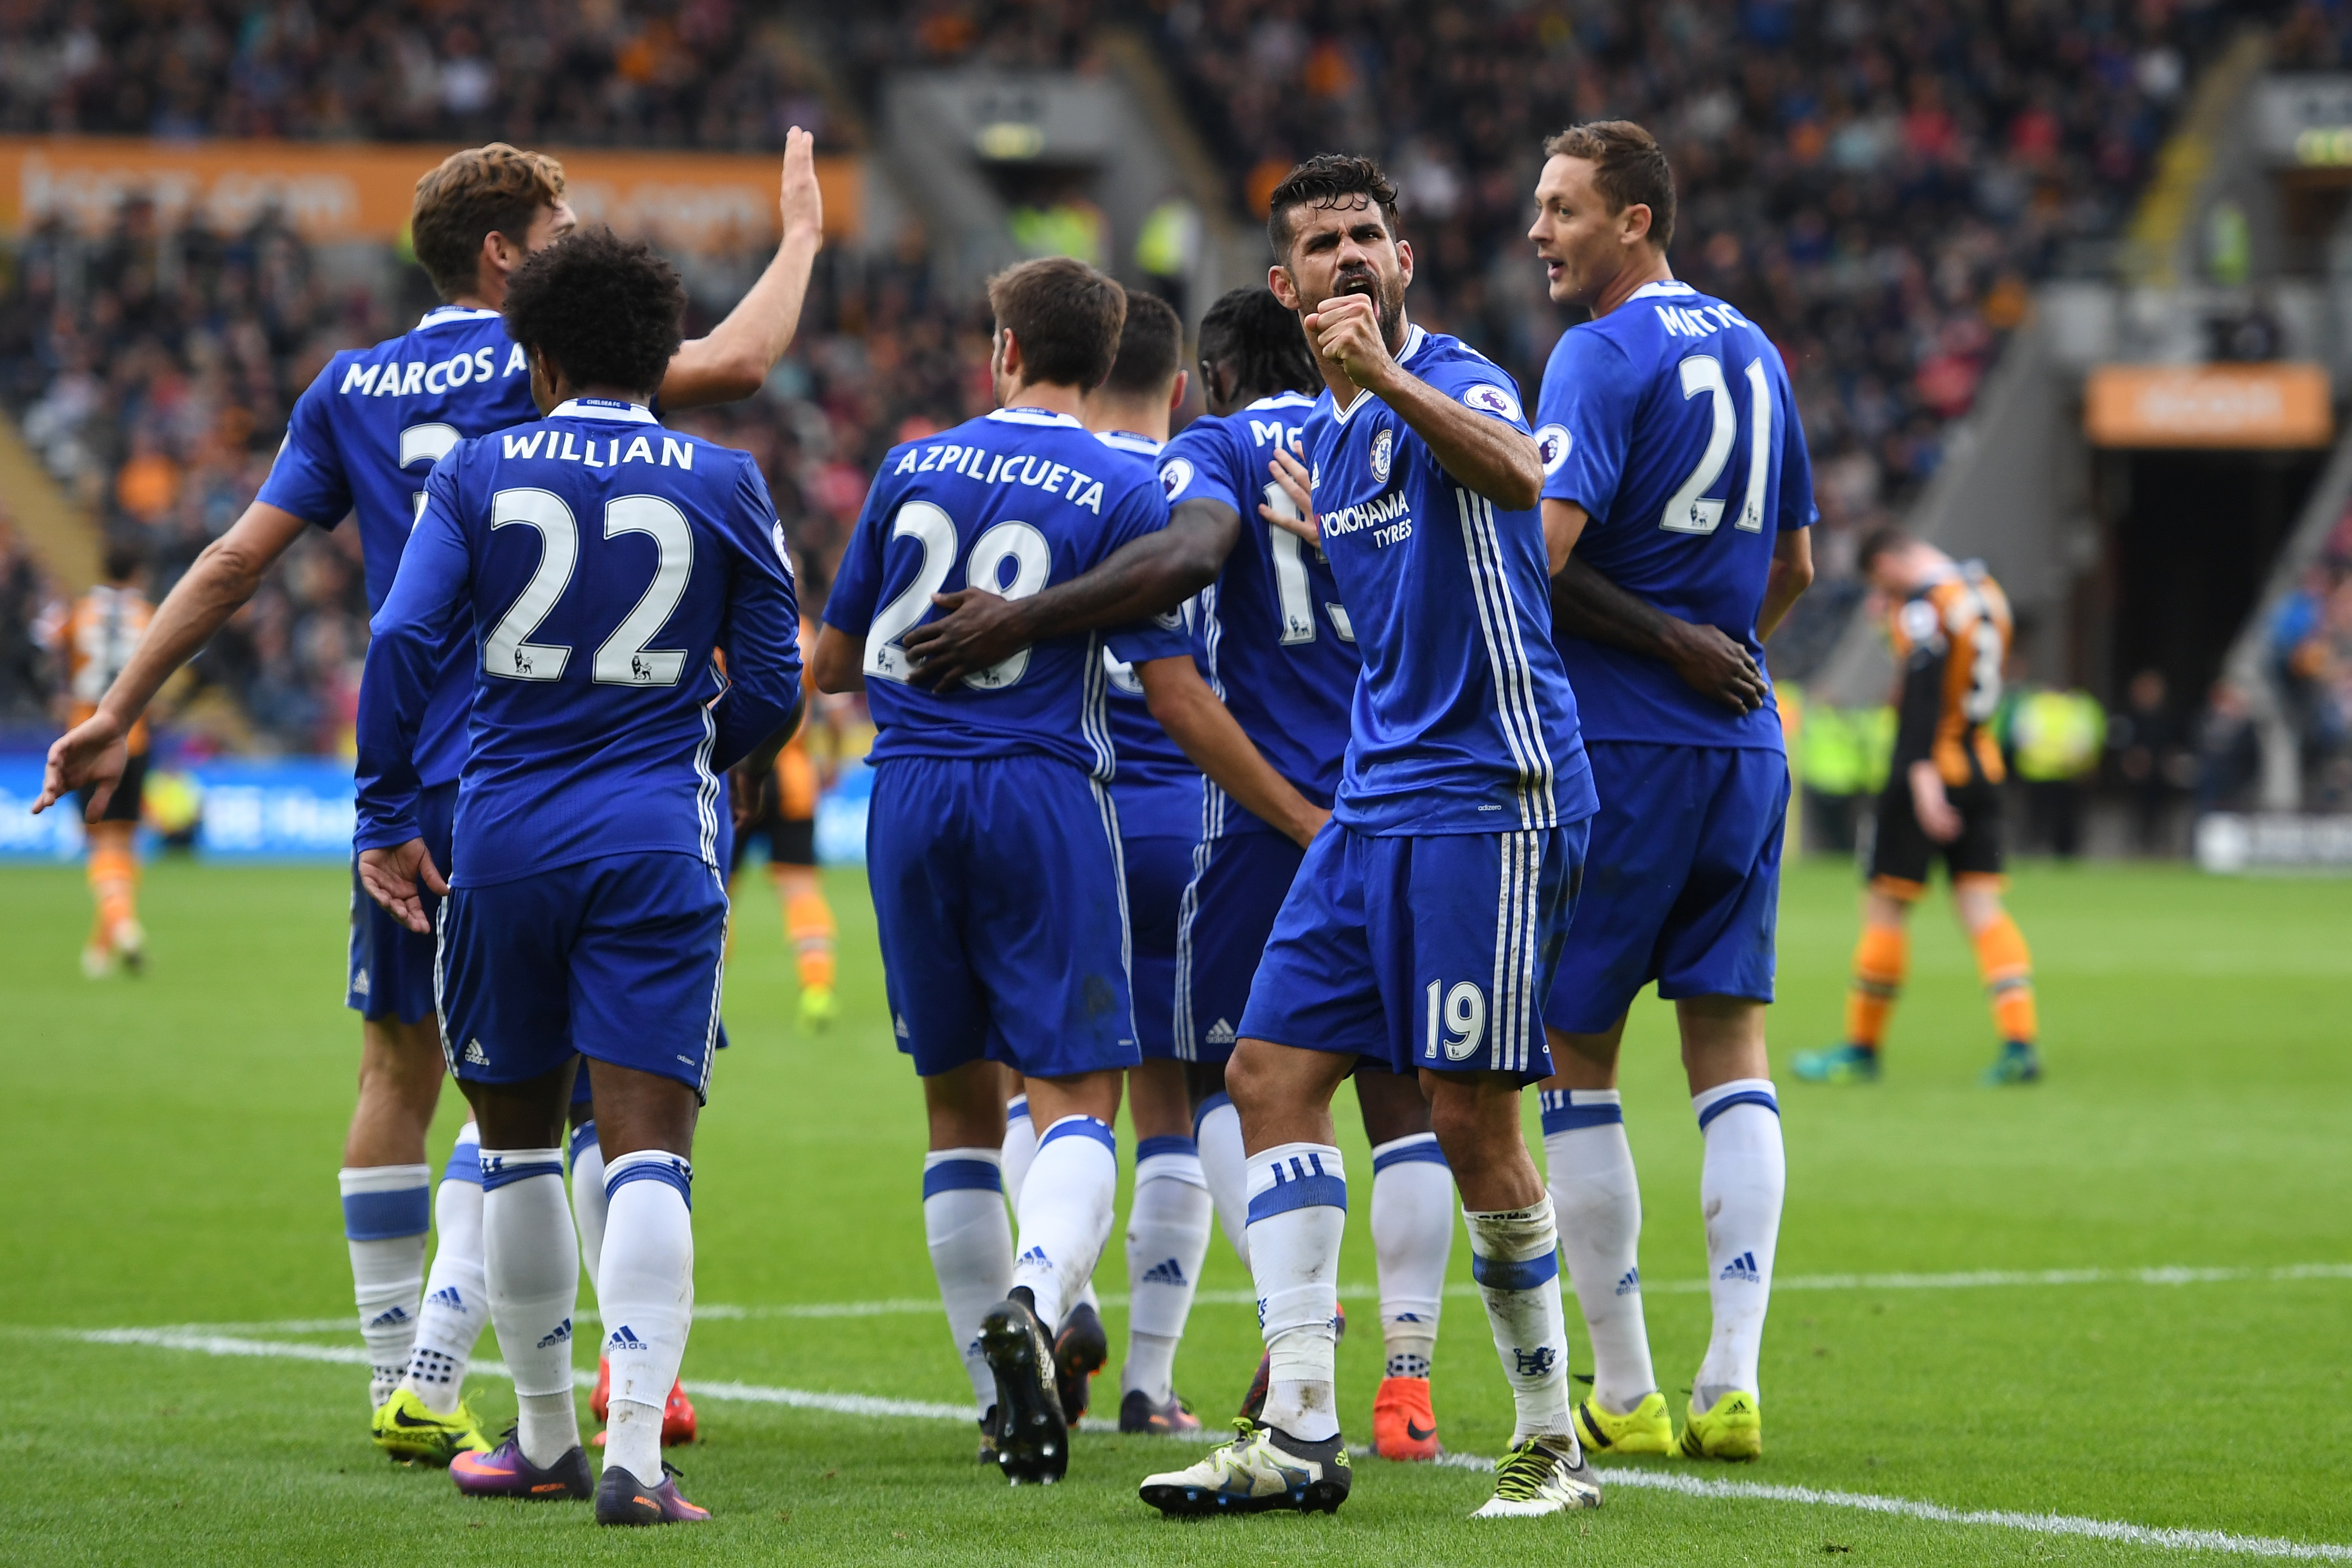 HULL, ENGLAND - OCTOBER 01:  Diego Costa of Chelsea celebrates scoring his sides second goal with his team mates during the Premier League match between Hull City and Chelsea at KCOM Stadium on October 1, 2016 in Hull, England.  (Photo by Shaun Botterill/Getty Images)